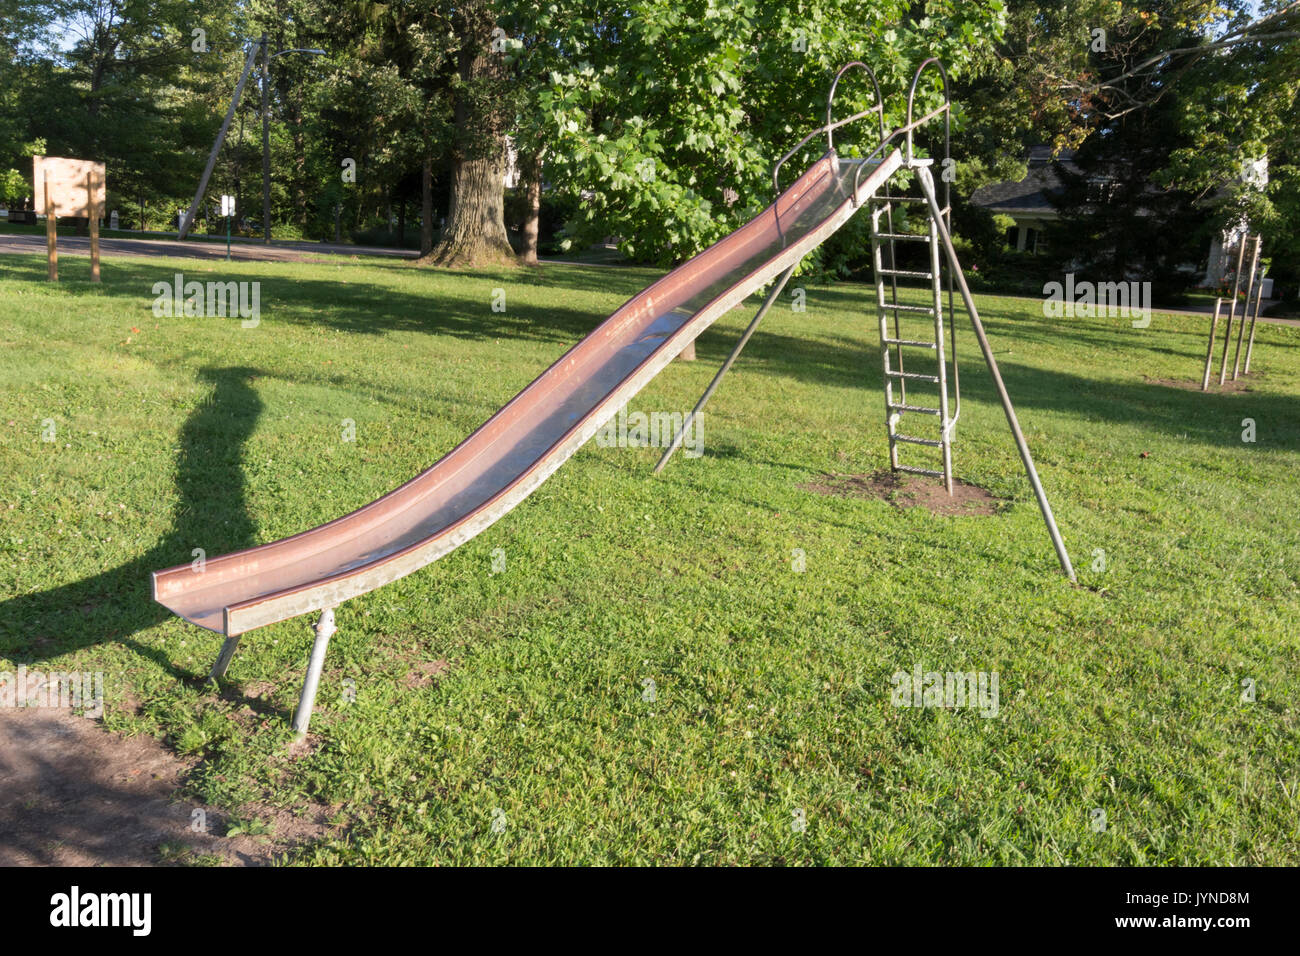 Image of an american made kids slide Stock Photo